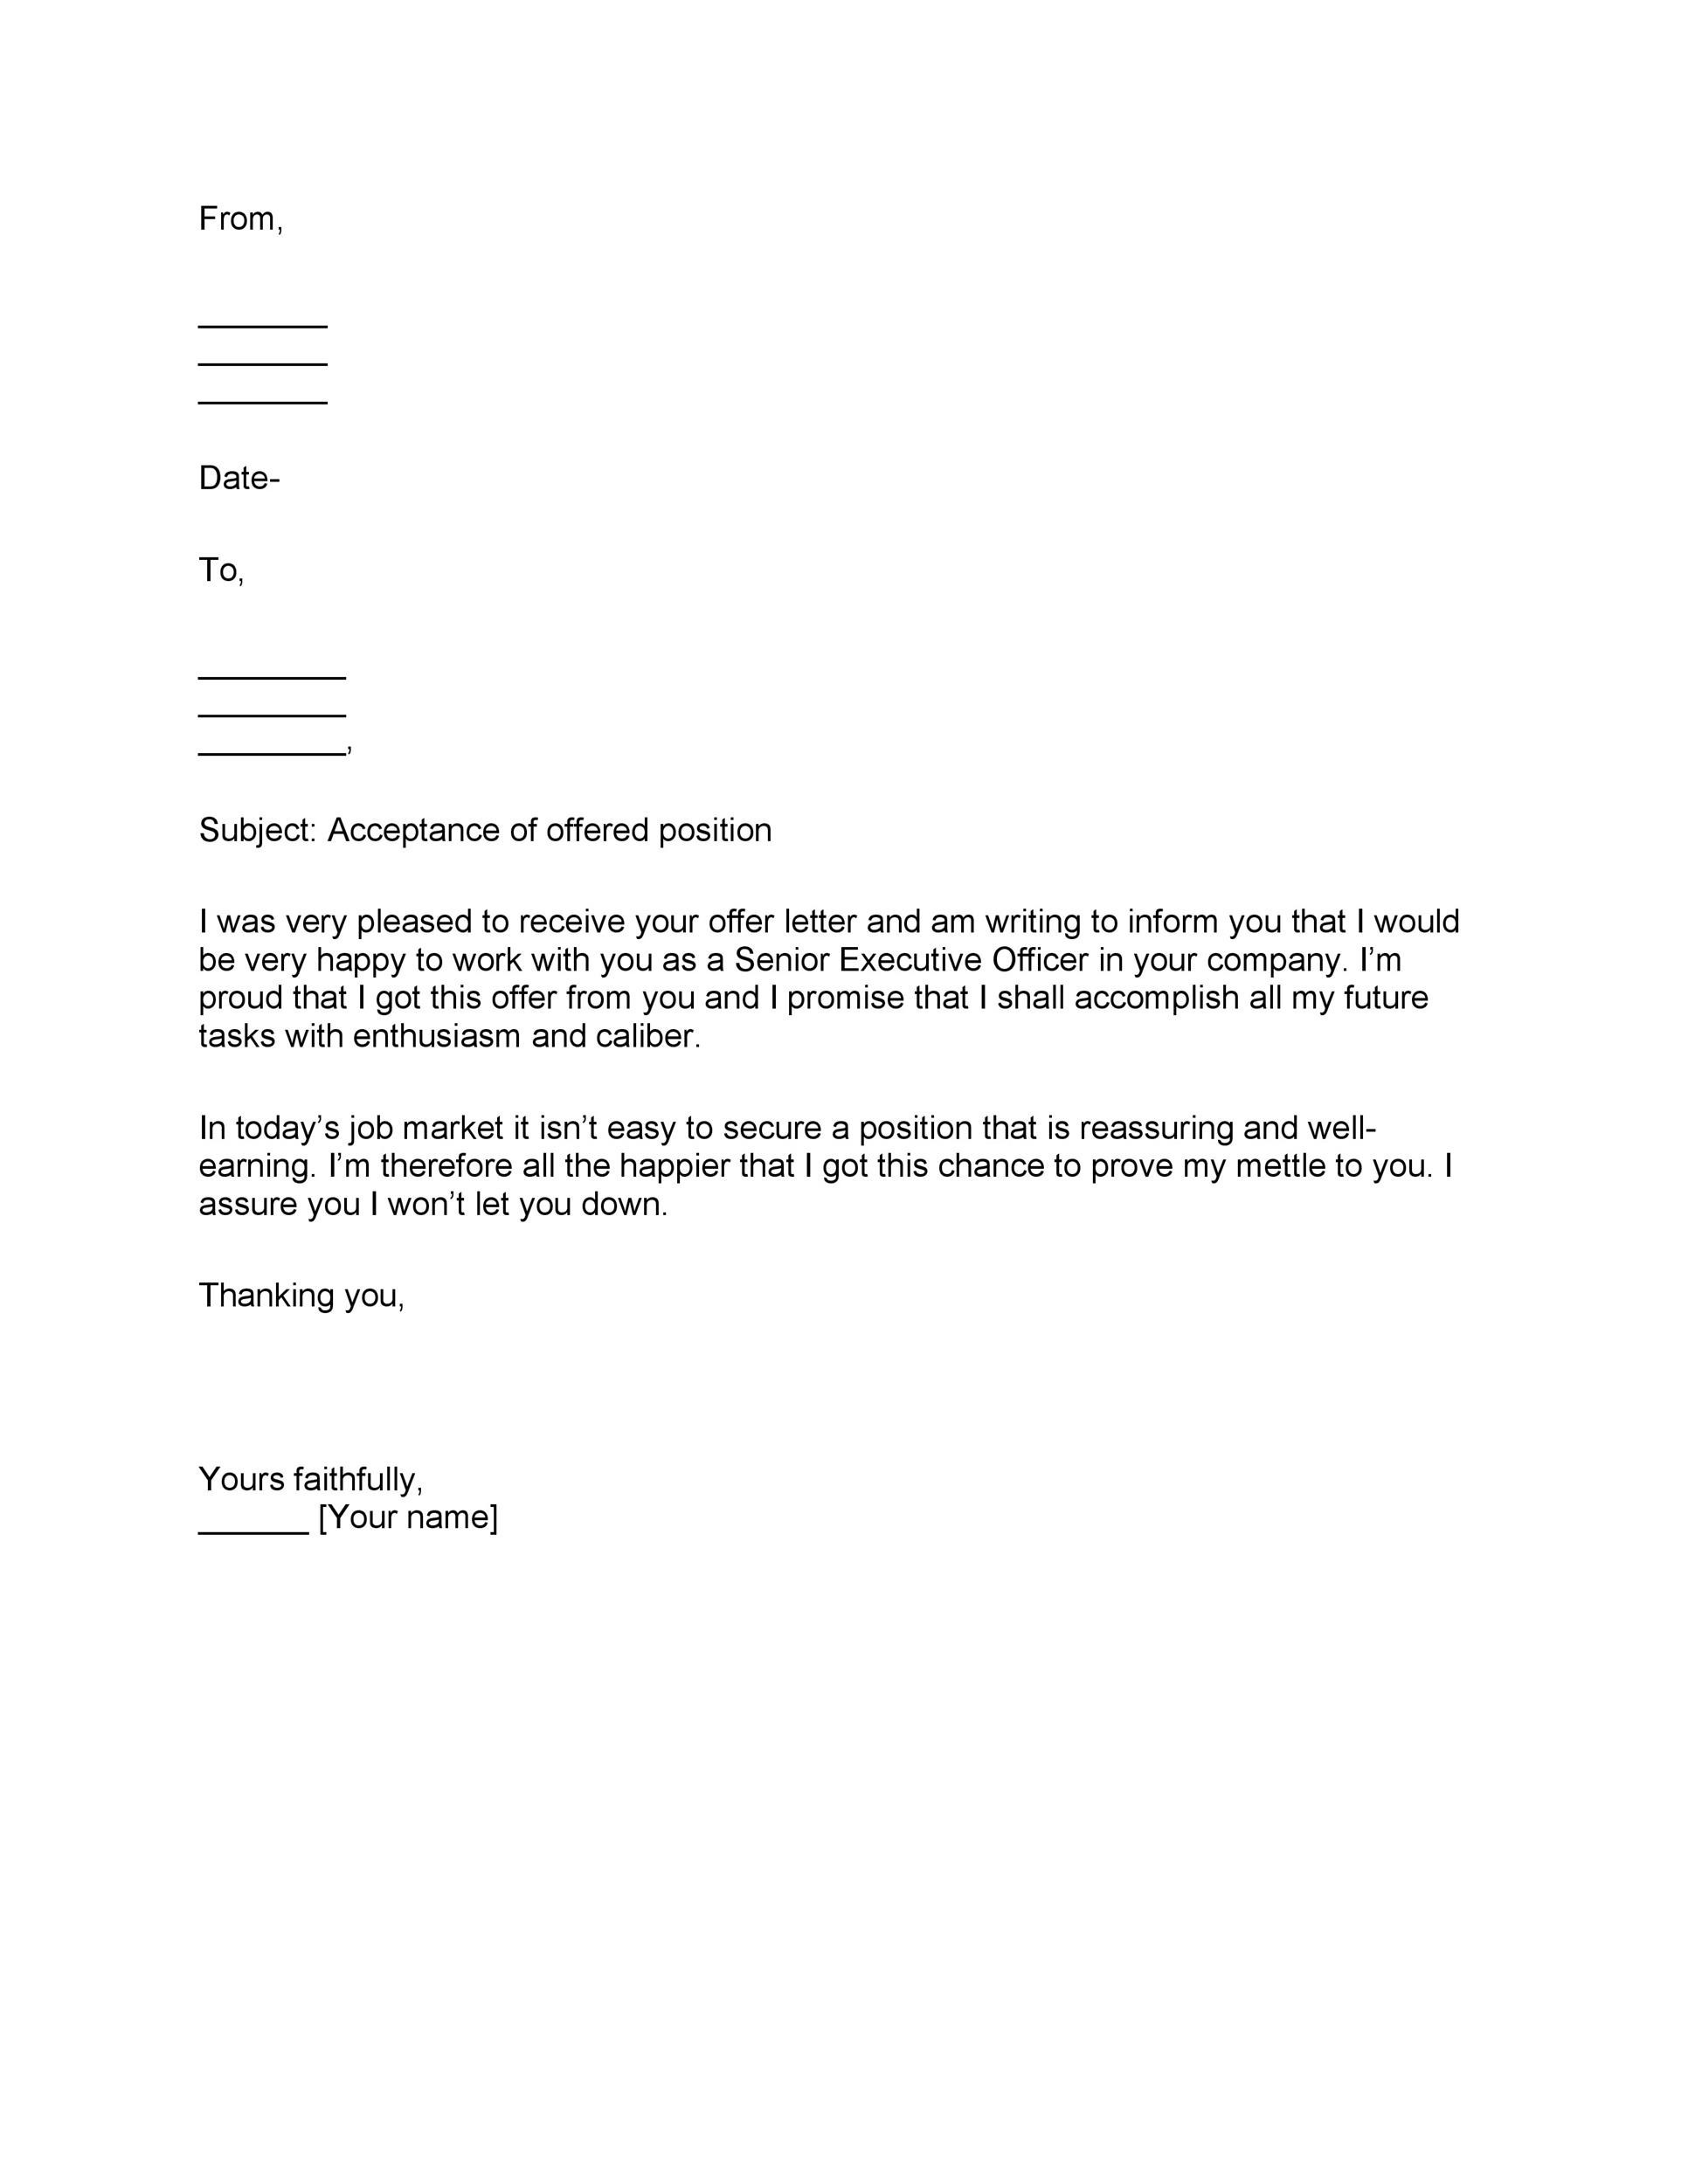 how to write an email to accept the offer letter